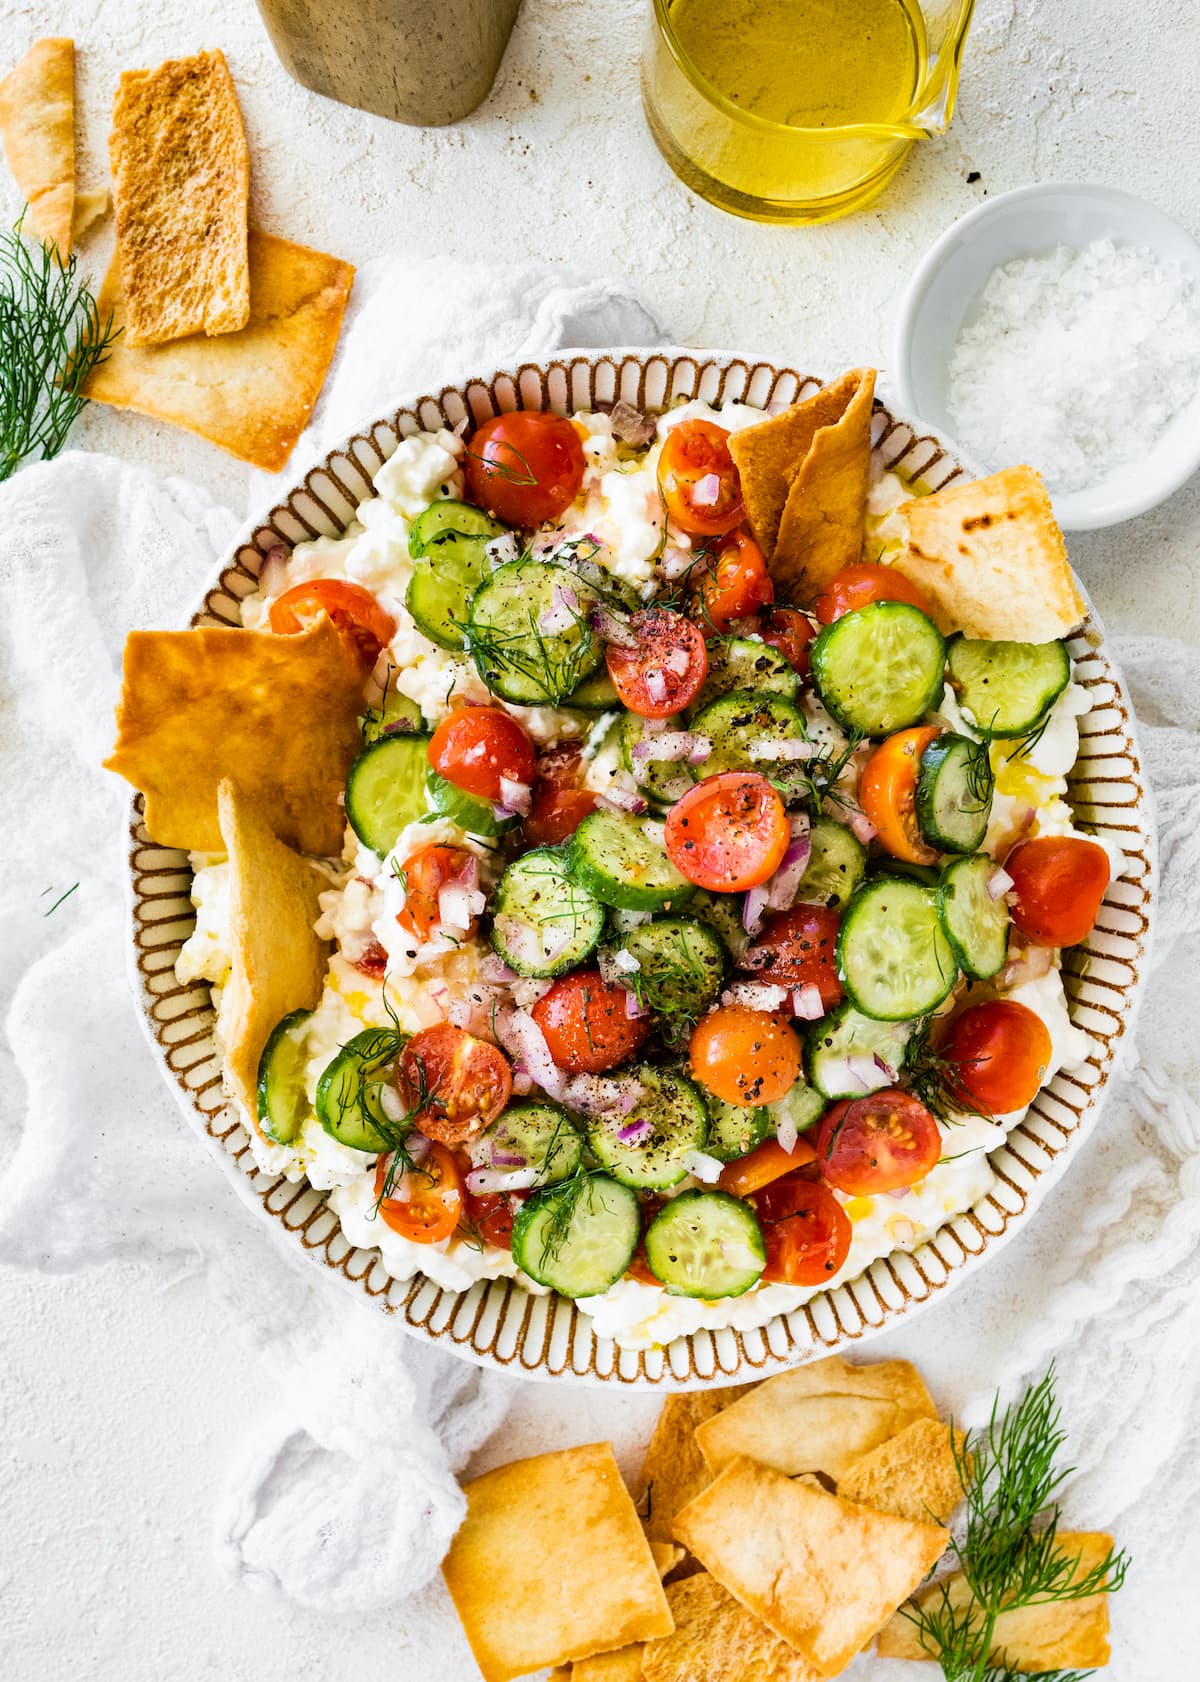 A cottage cheese salad with cucumber, tomatoes, seasoning, and fresh herbs in a large bowl with pita chips on the side.